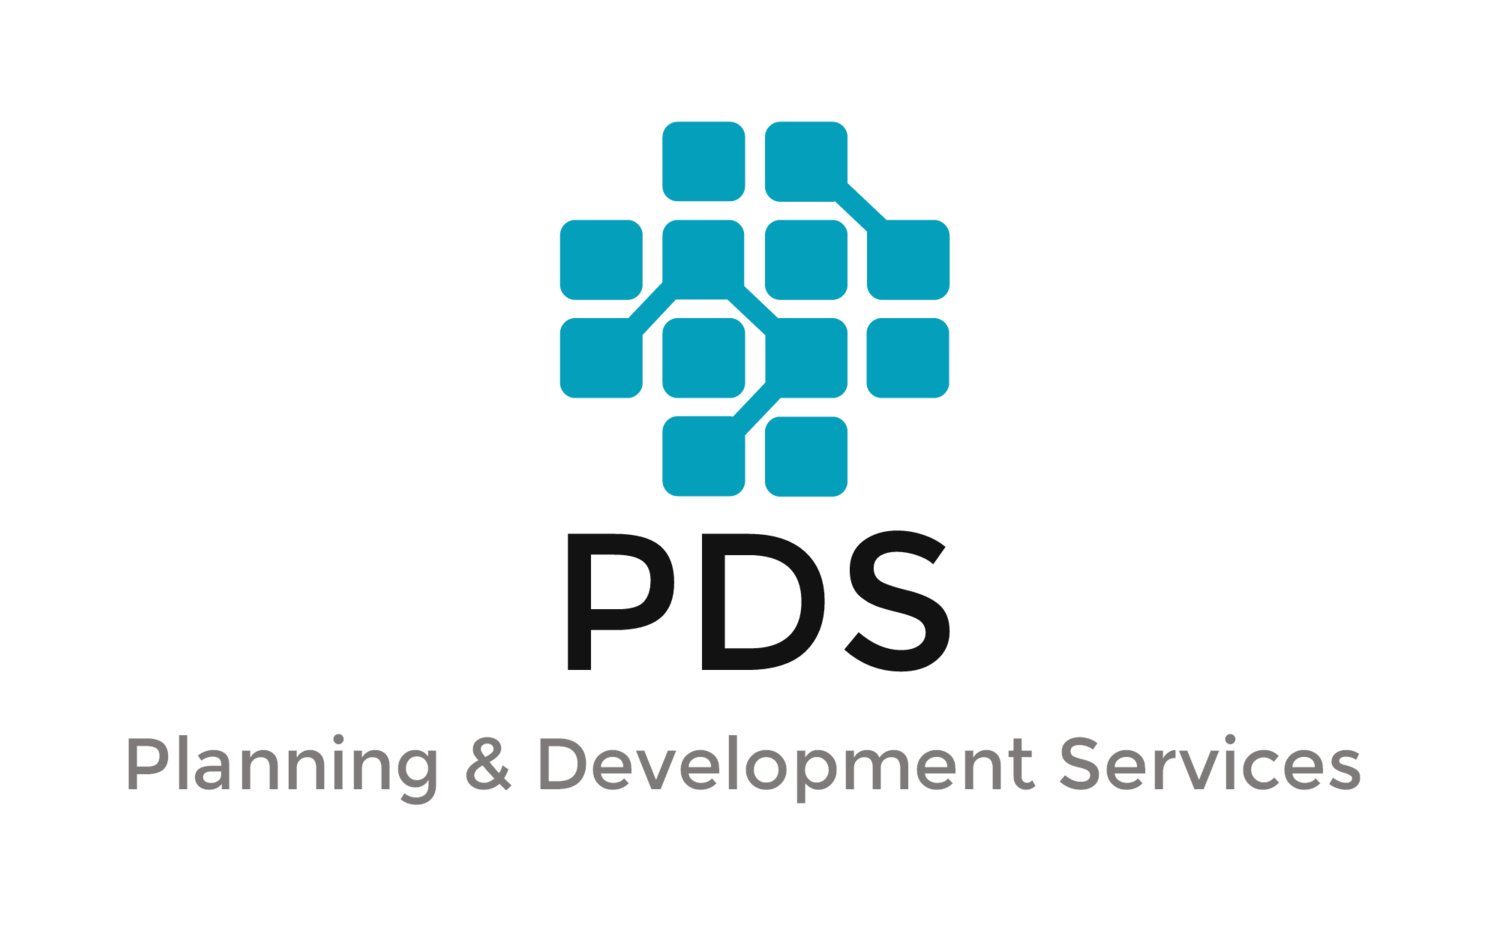 PDS - Planning and Development Services